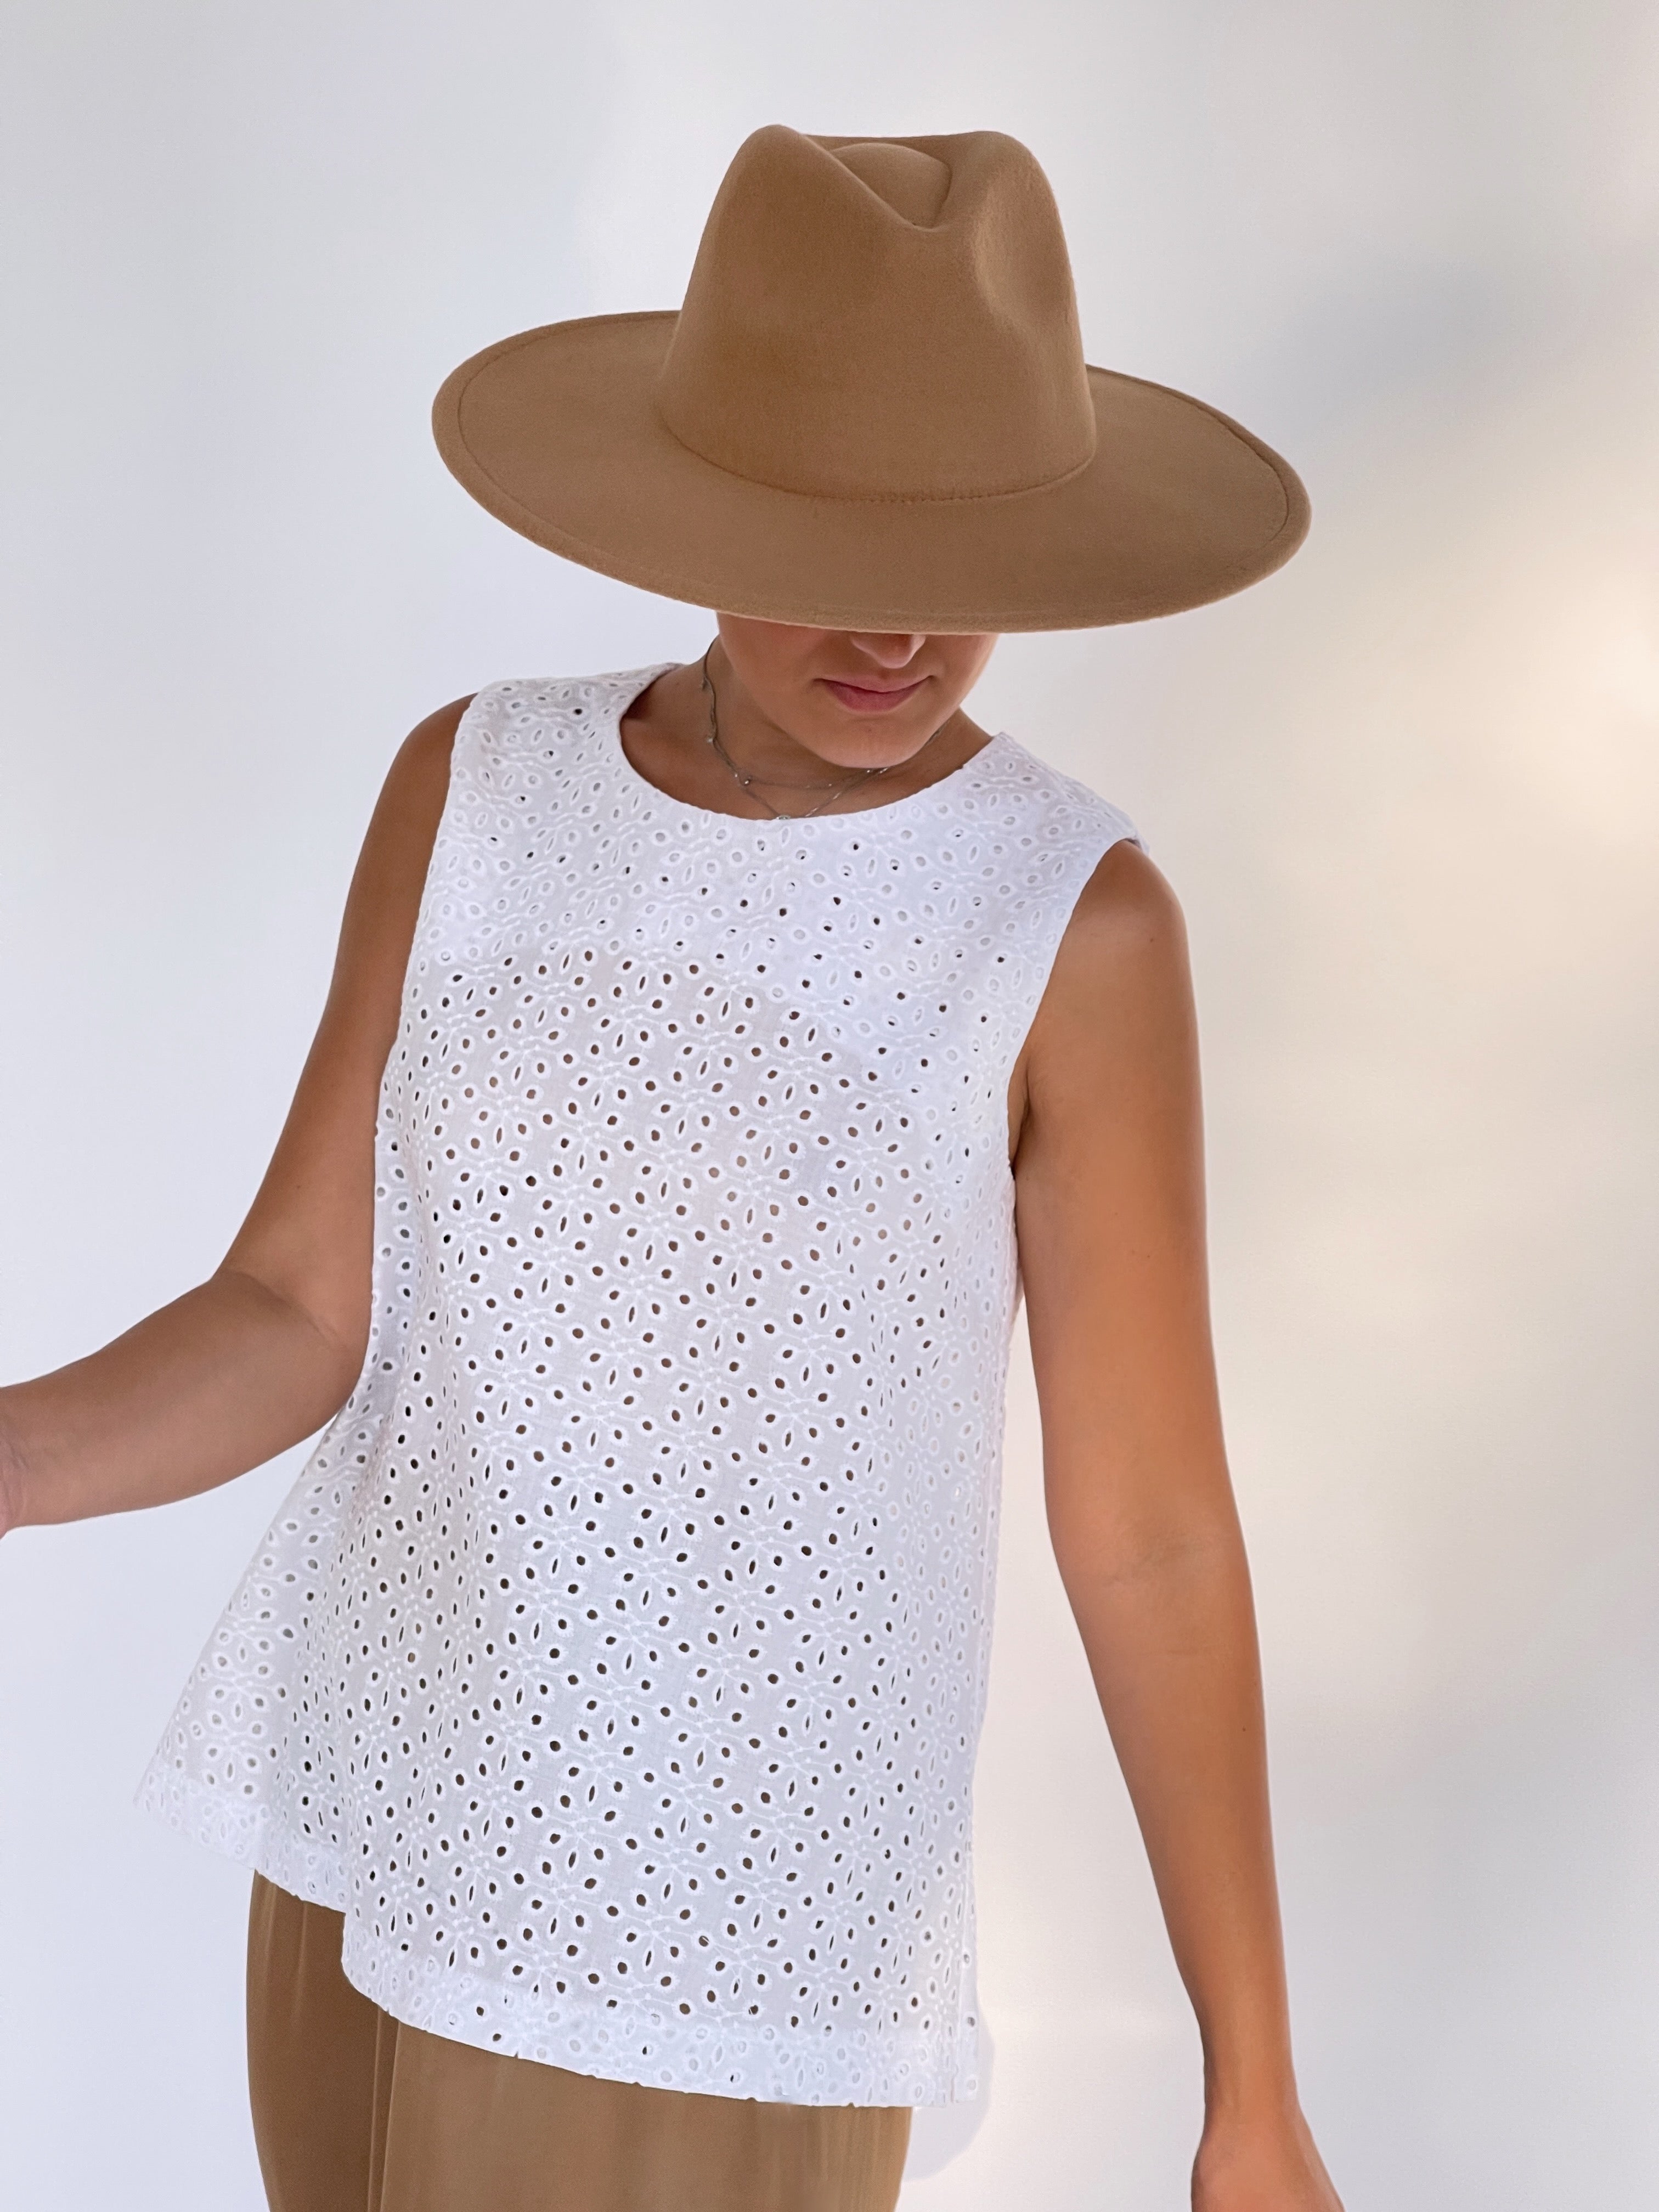 BRODERIE SLEEVELESS TOP IN WHITE - Top - LE TRÉ